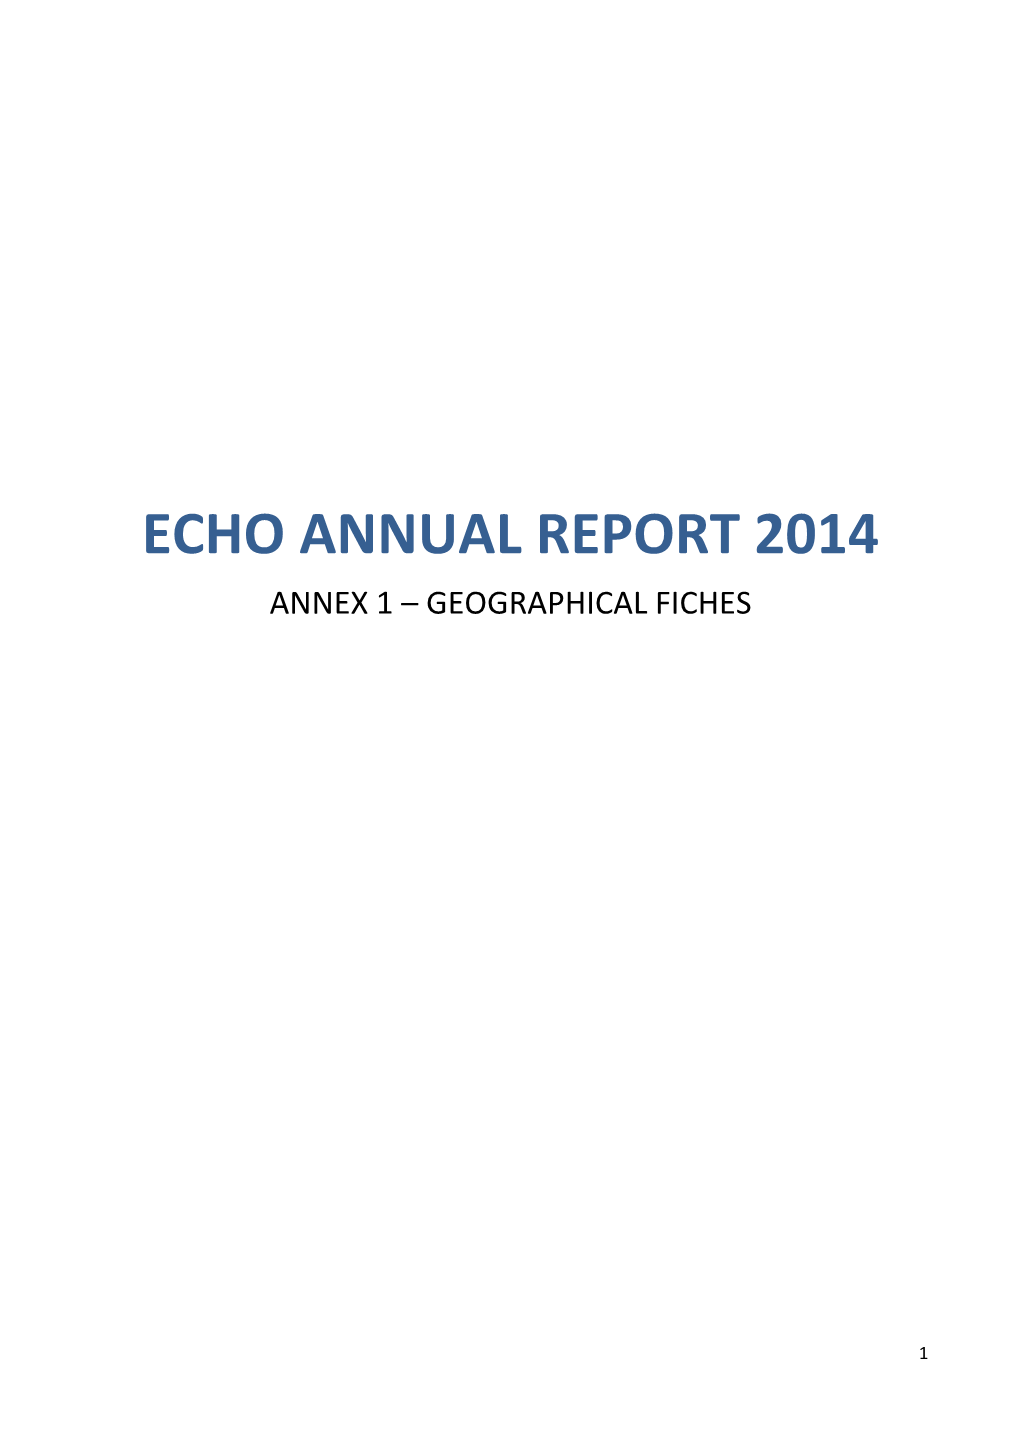 Echo Annual Report 2014 Annex 1 – Geographical Fiches